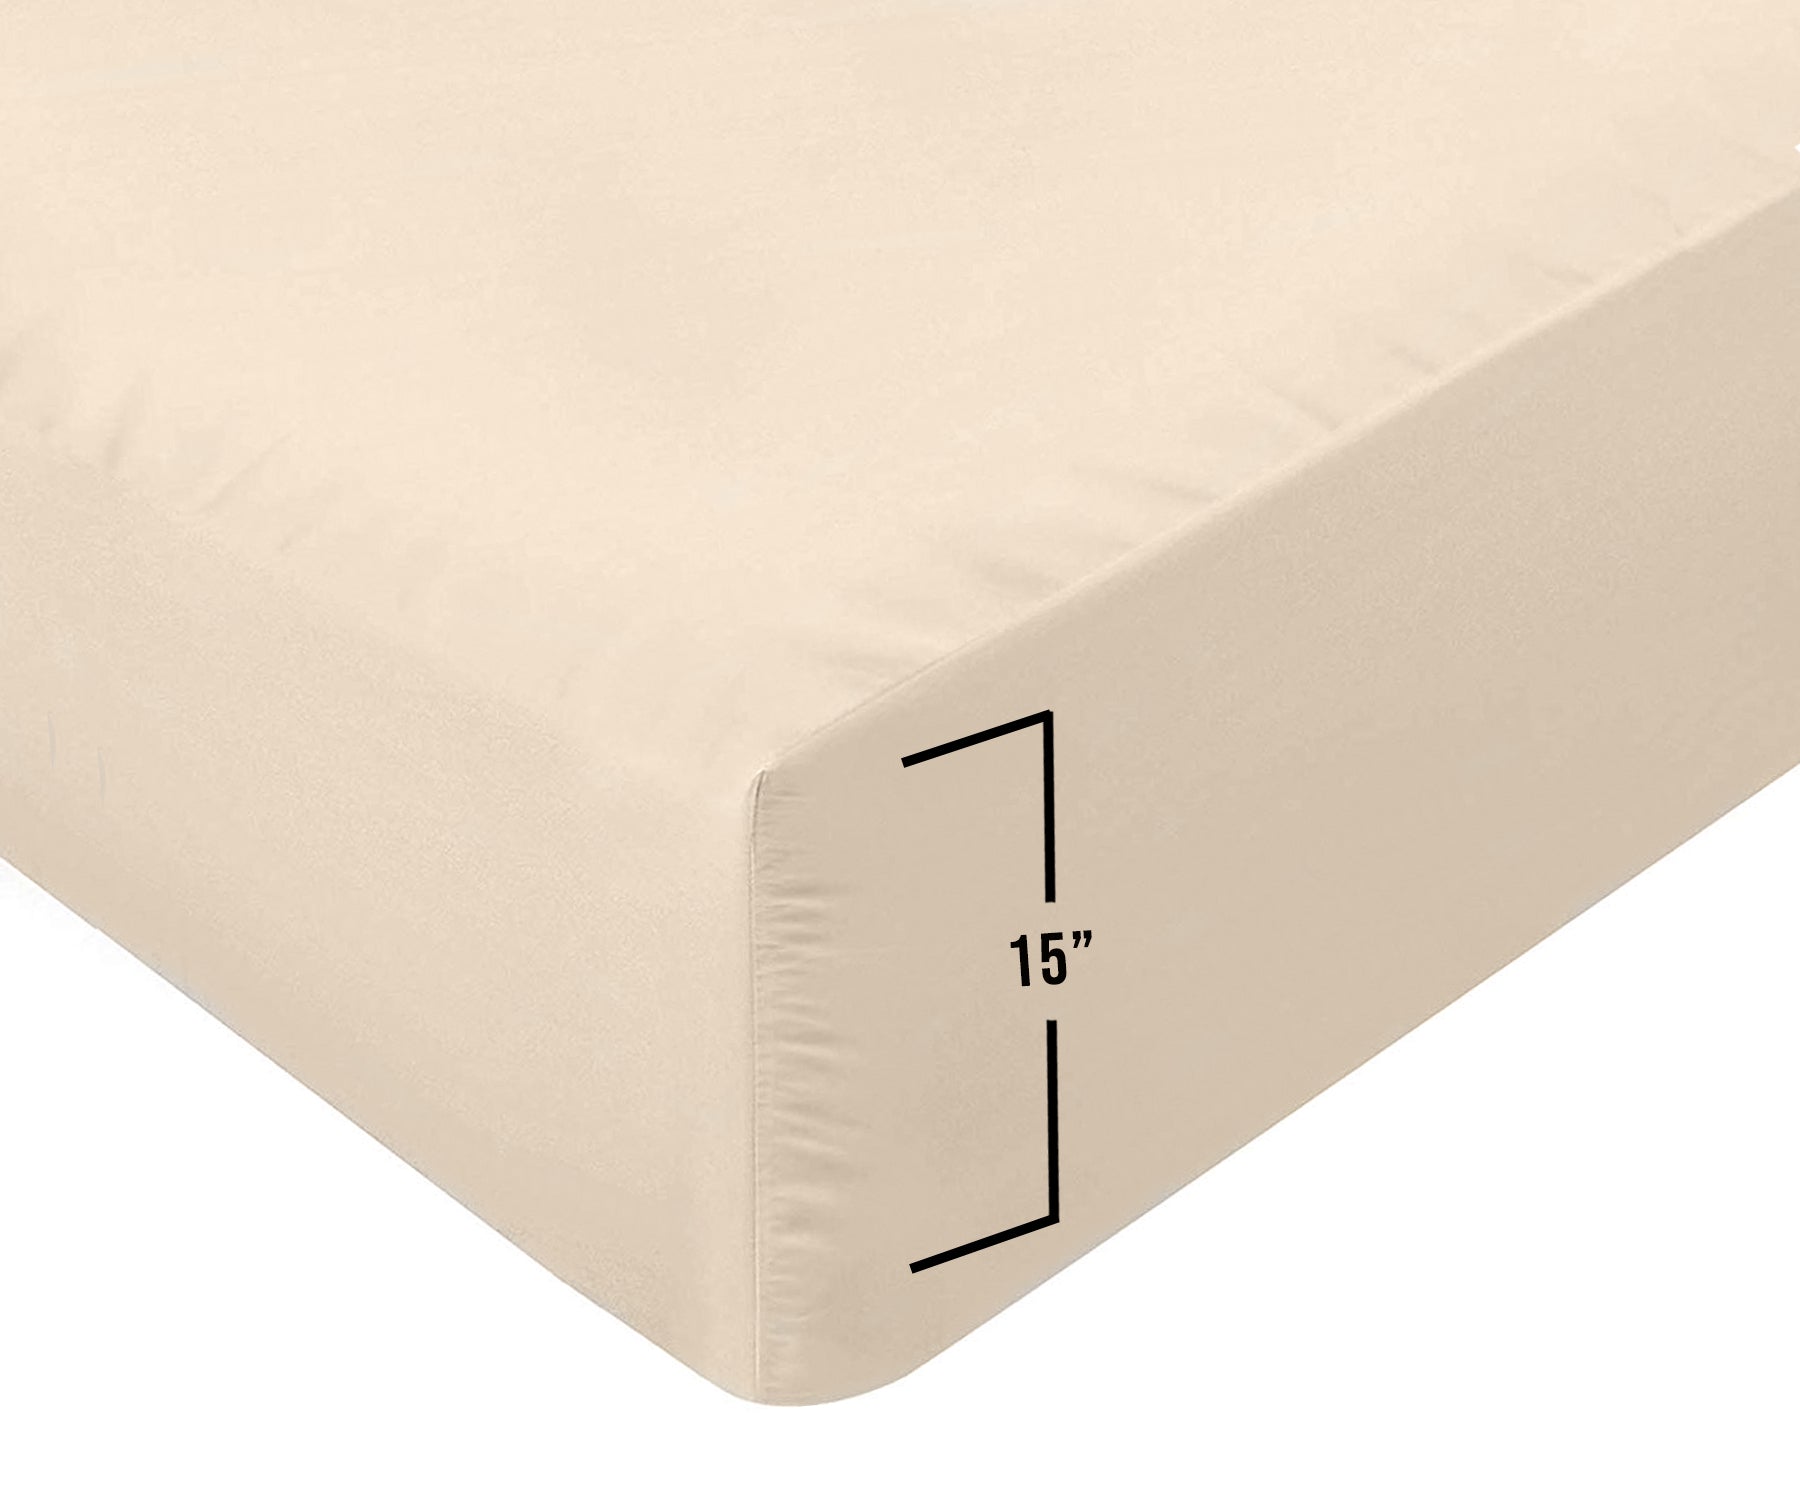 Display of the cotton fitted sheet with its size measurements